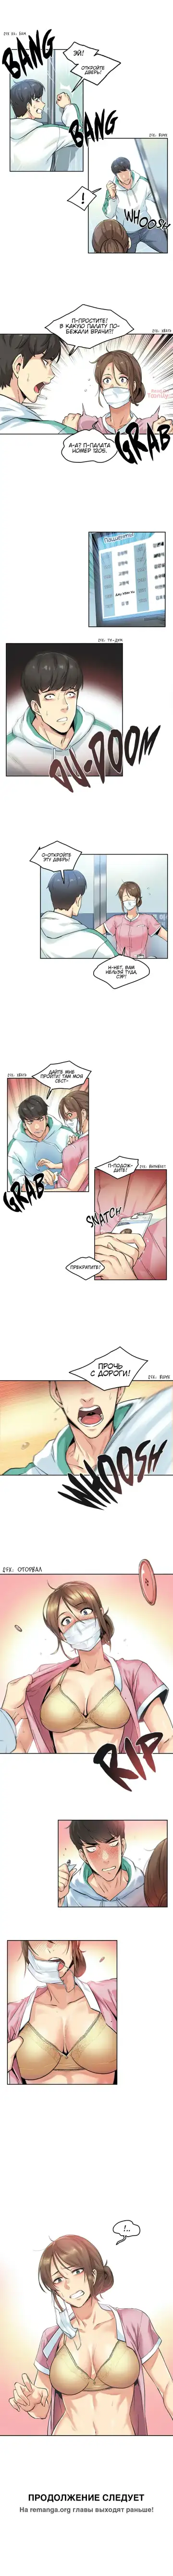 [Gamang] DADDY'S WILD OATS | Surrogate Father Ch. 1-16 Fhentai.net - Page 26